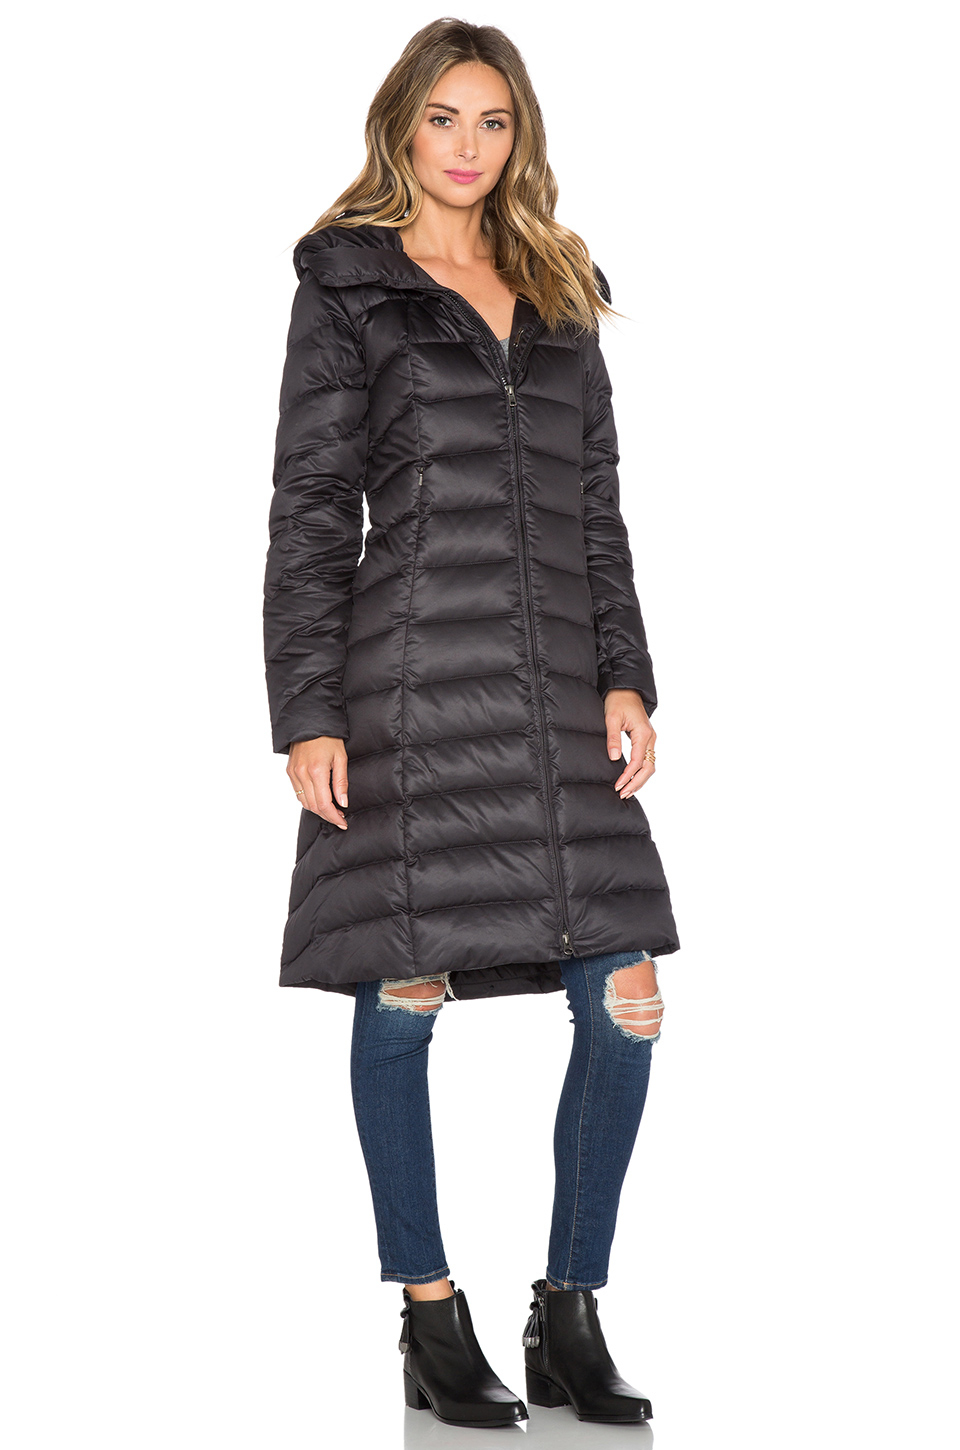 Patagonia Downtown Loft Parka in Black - Lyst